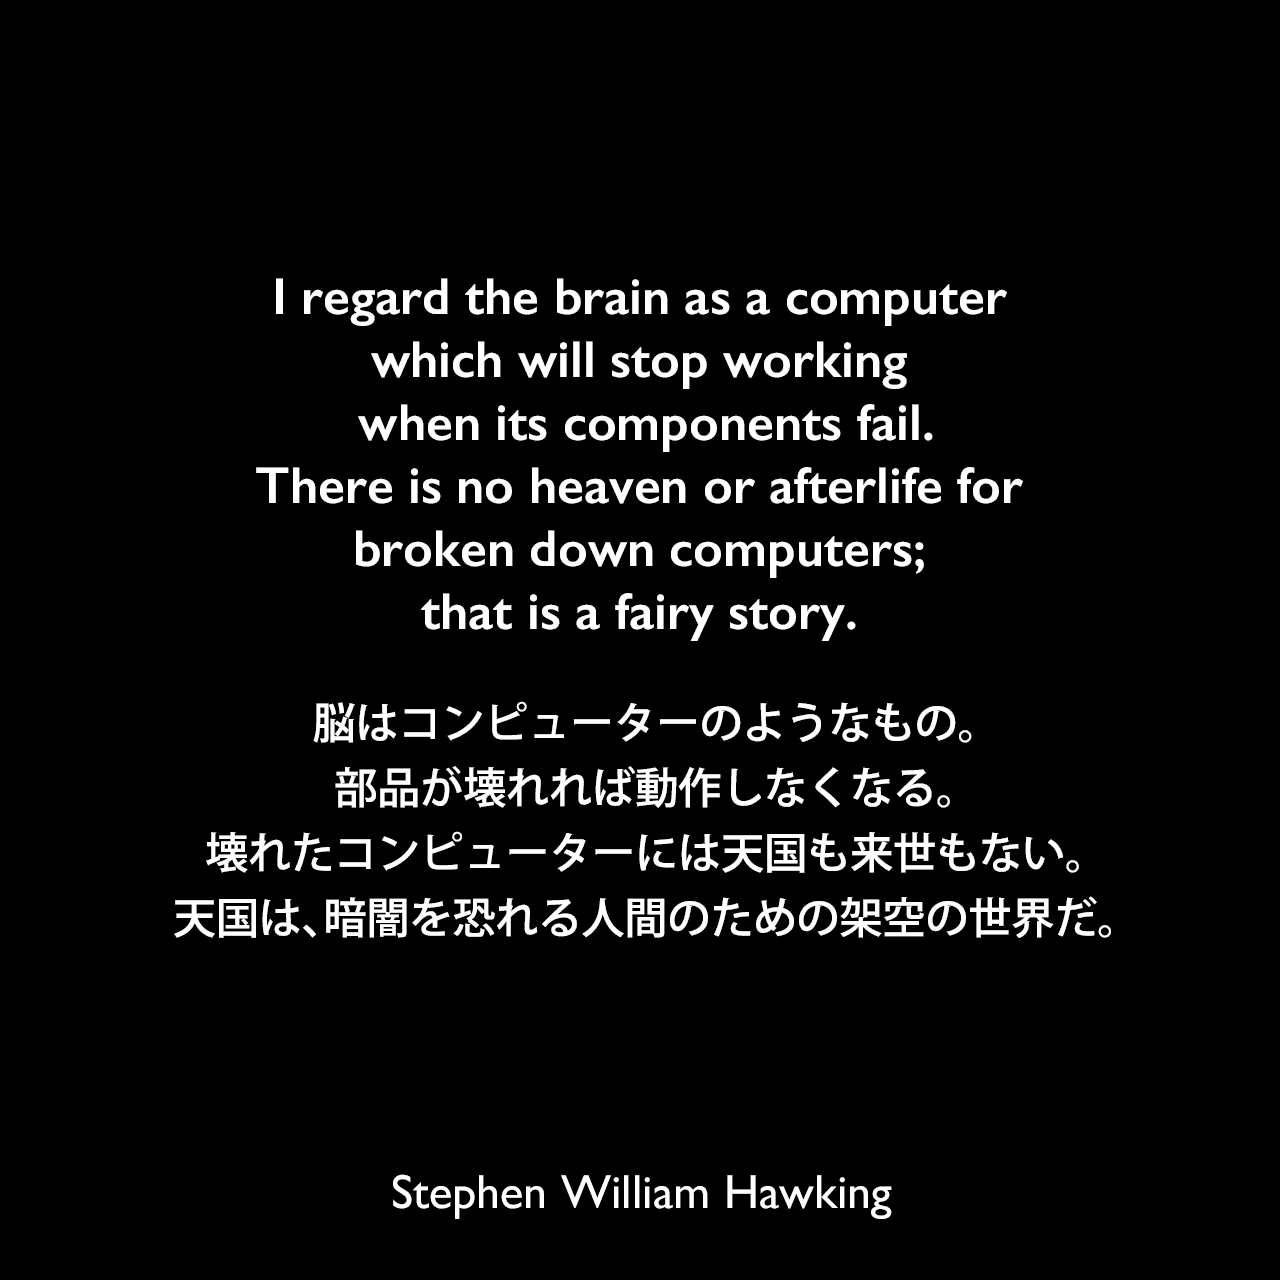 I regard the brain as a computer which will stop working when its components fail.There is no heaven or afterlife for broken down computers; that is a fairy story.脳はコンピューターのようなもの。部品が壊れれば動作しなくなる。壊れたコンピューターには天国も来世もない。天国は、暗闇を恐れる人間のための架空の世界だ。- 2011年のイギリス大手新聞「ガーディアン」誌よりStephen William Hawking